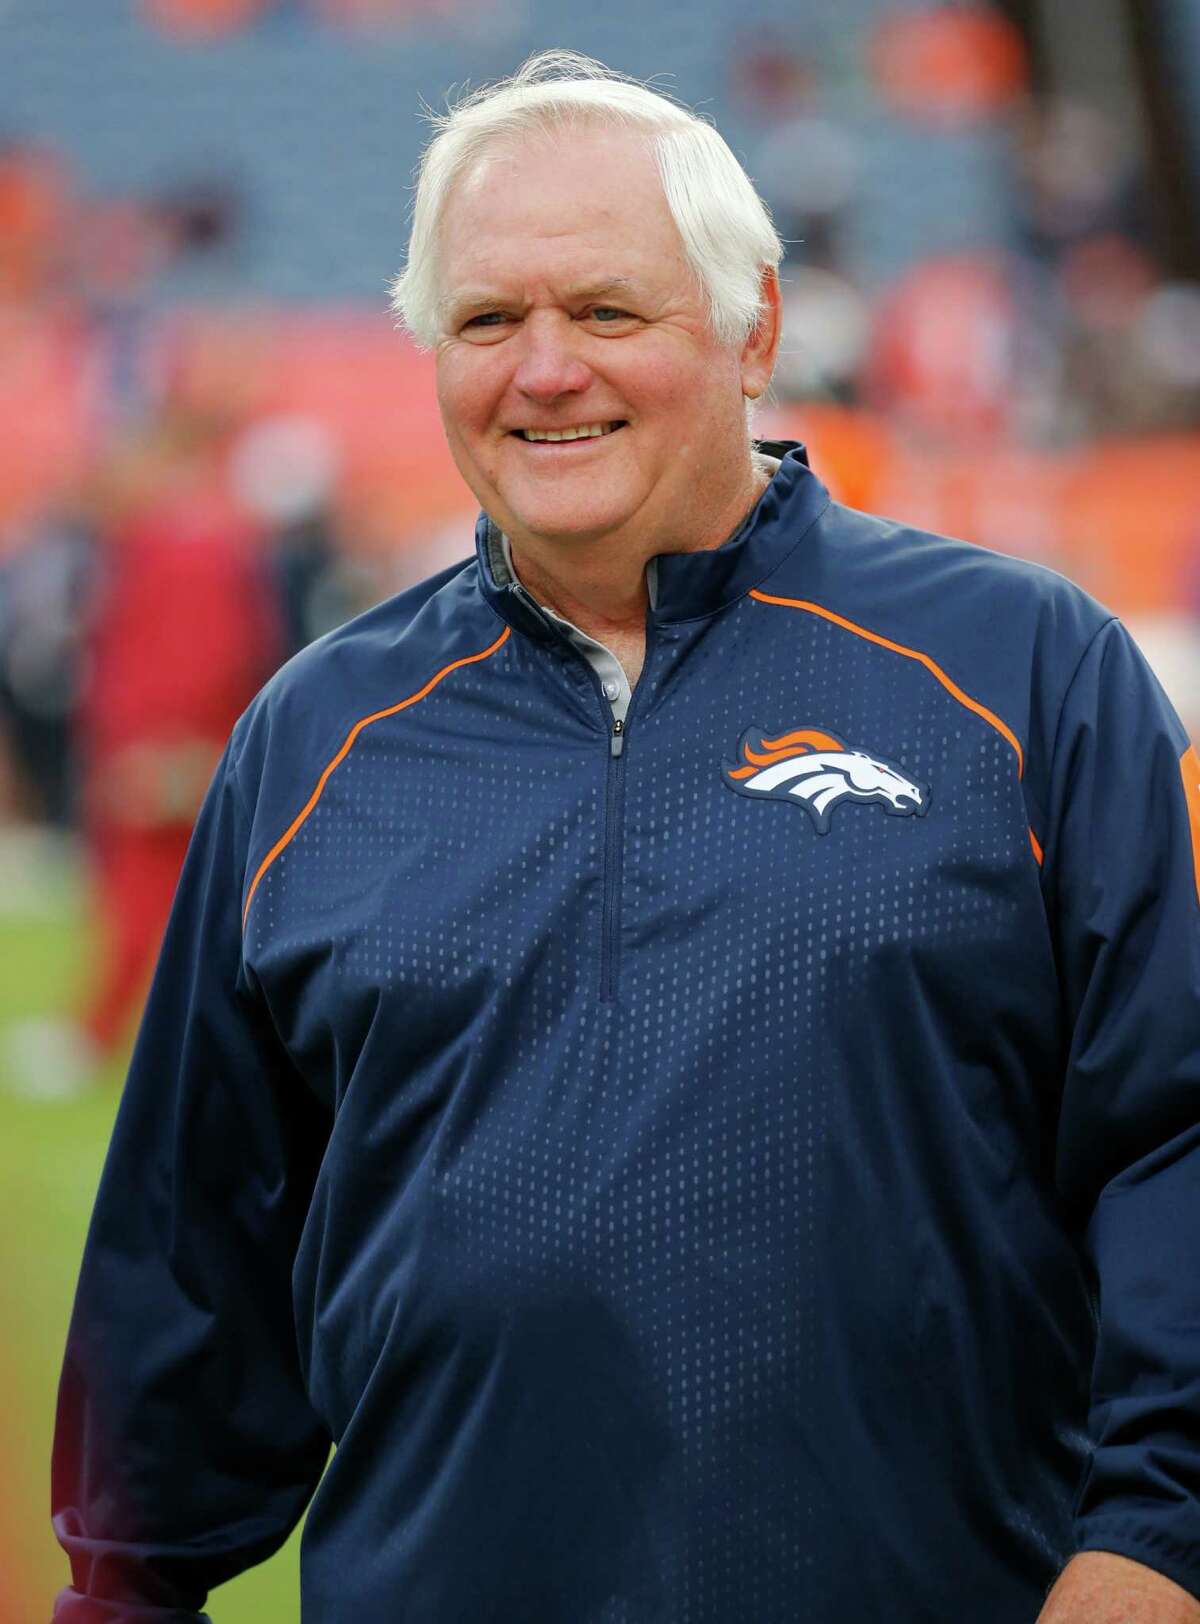 Broncos defensive coordinator Wade Phillips' Super Bowl ring came with a glitch Sunday: the wrong name on it. Click through the gallery to see photos of Phillips through the years.